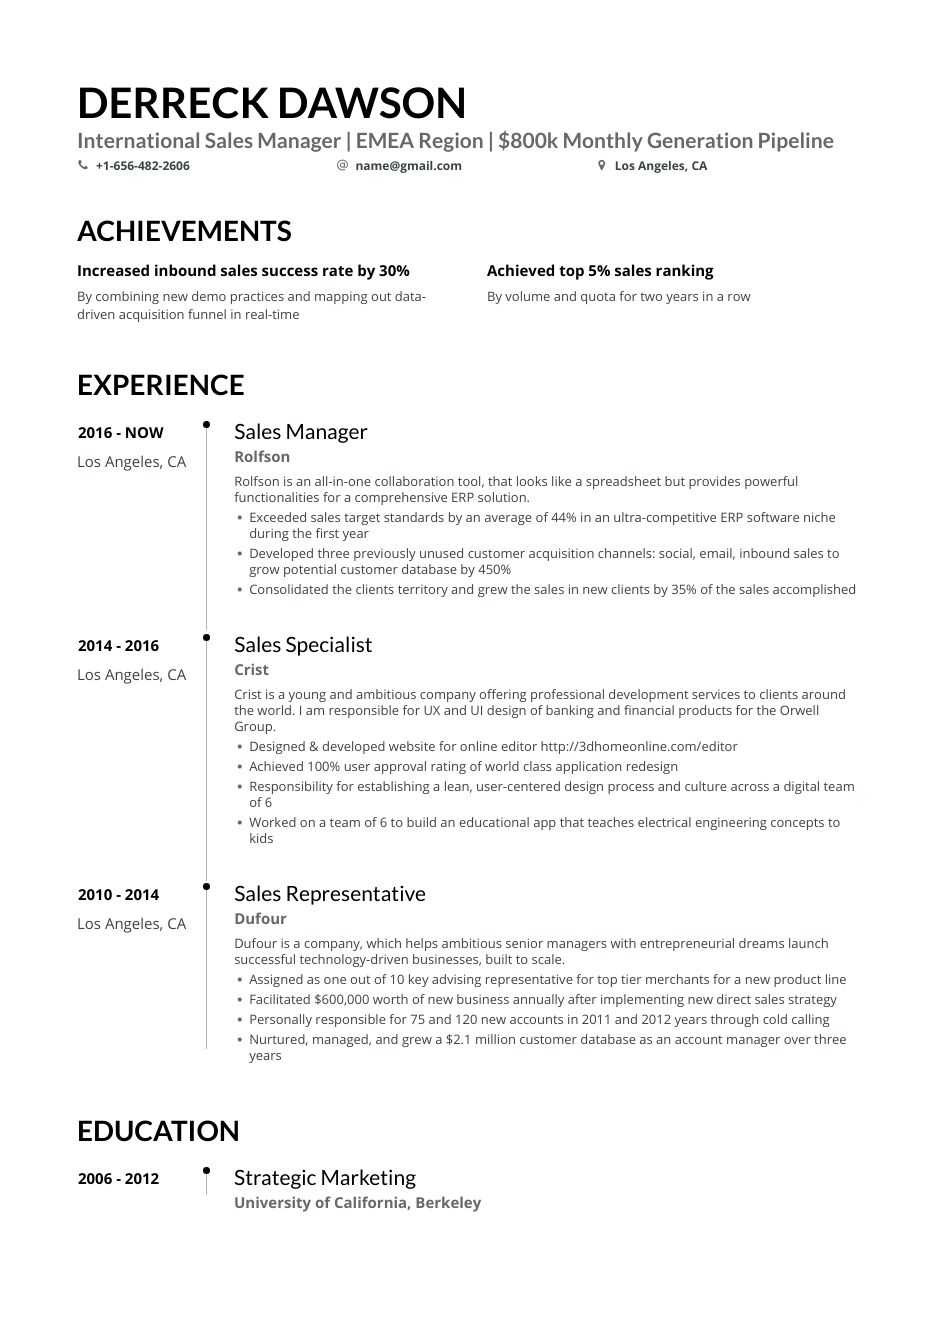 Sample Resume Headline for Sales Manager Sales Manager: Resume Examples for 2021